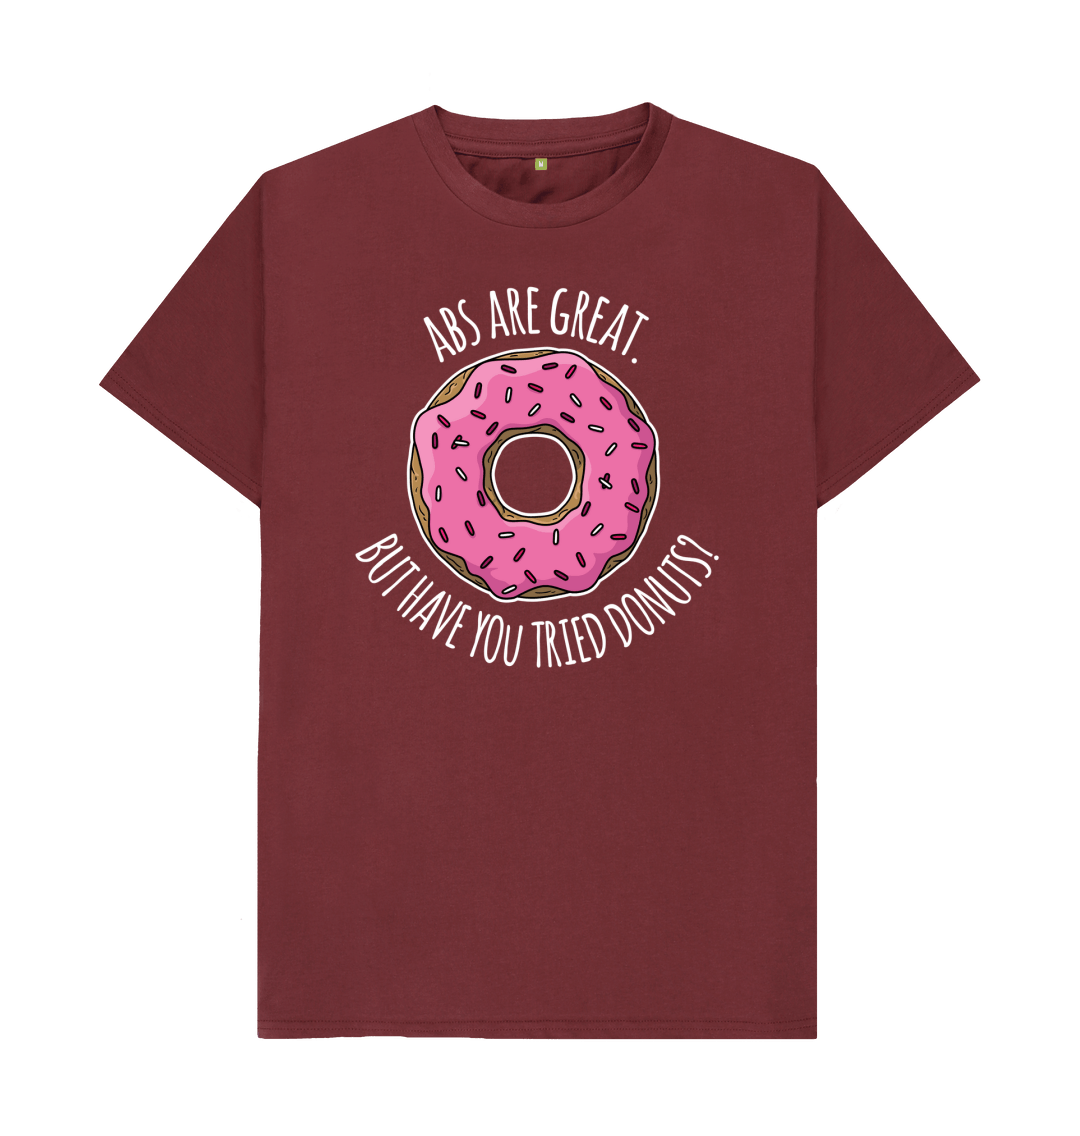 Abs Are Great but Have You Tried Donut Shirt Womens Graphic Tees Tumblr  Tshirt With Sayings for Women Funny T Shirt Workout T-shirts 